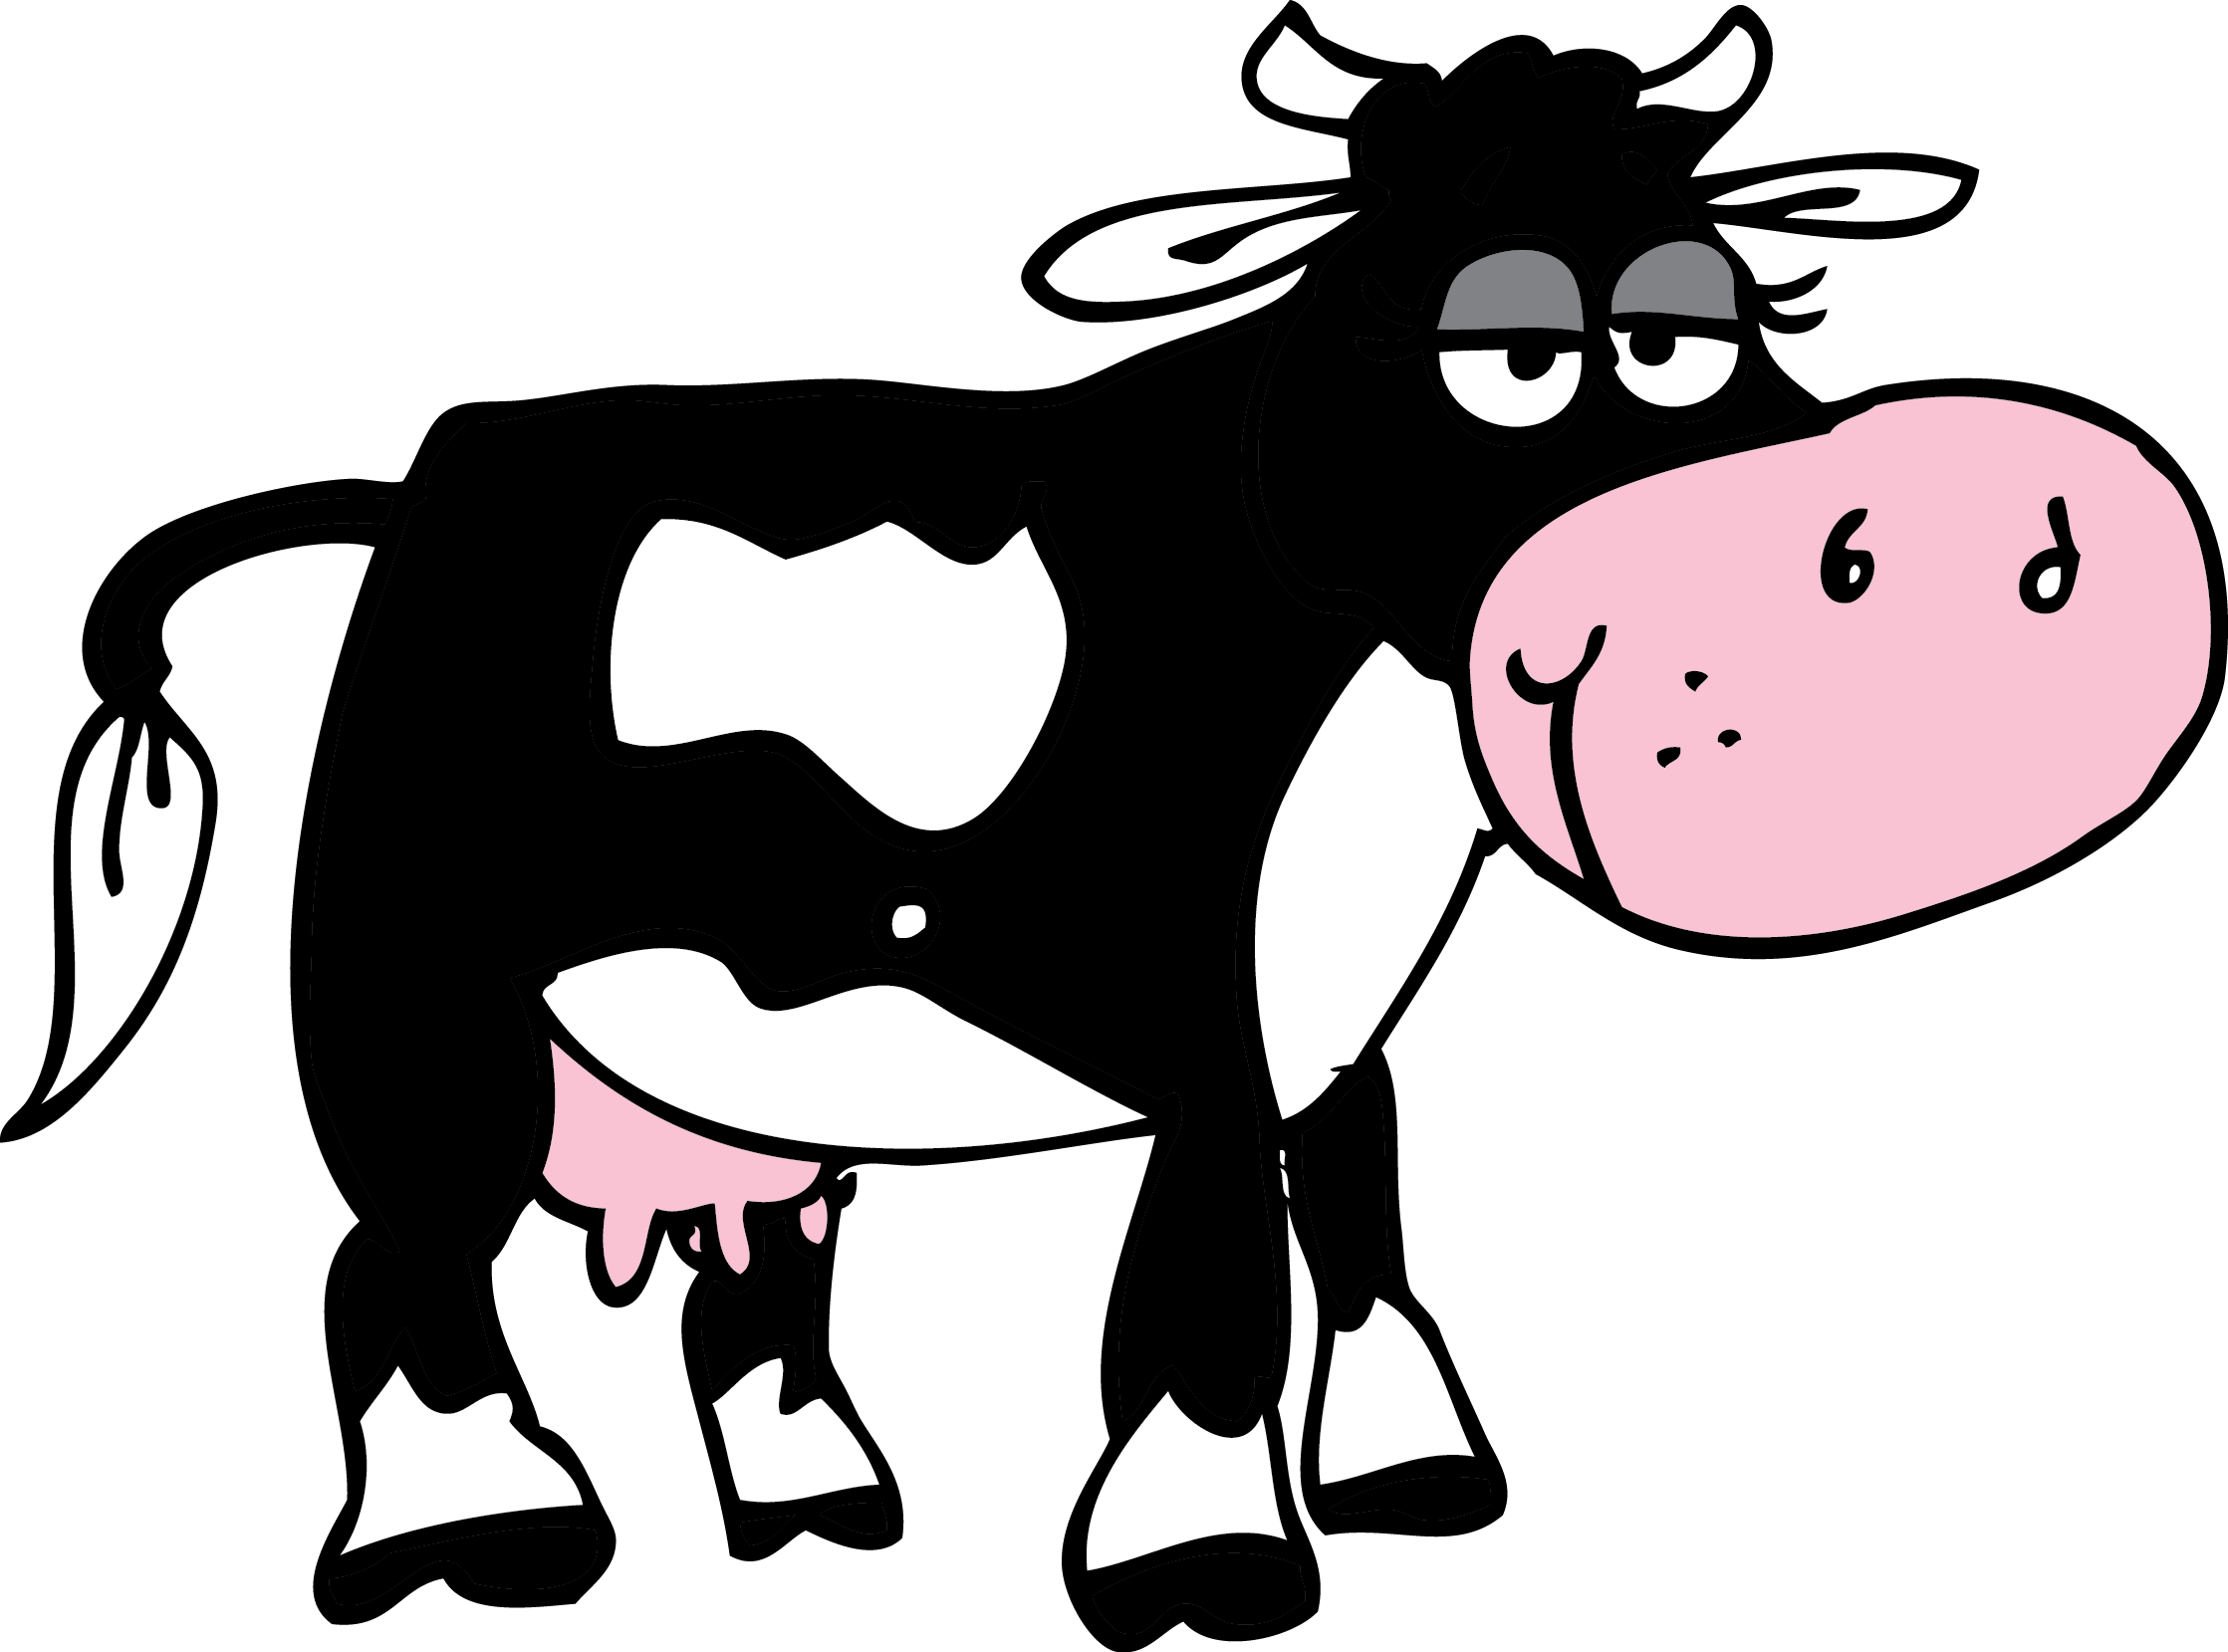 Cartoon Cow Jumping Images & Pictures - Becuo